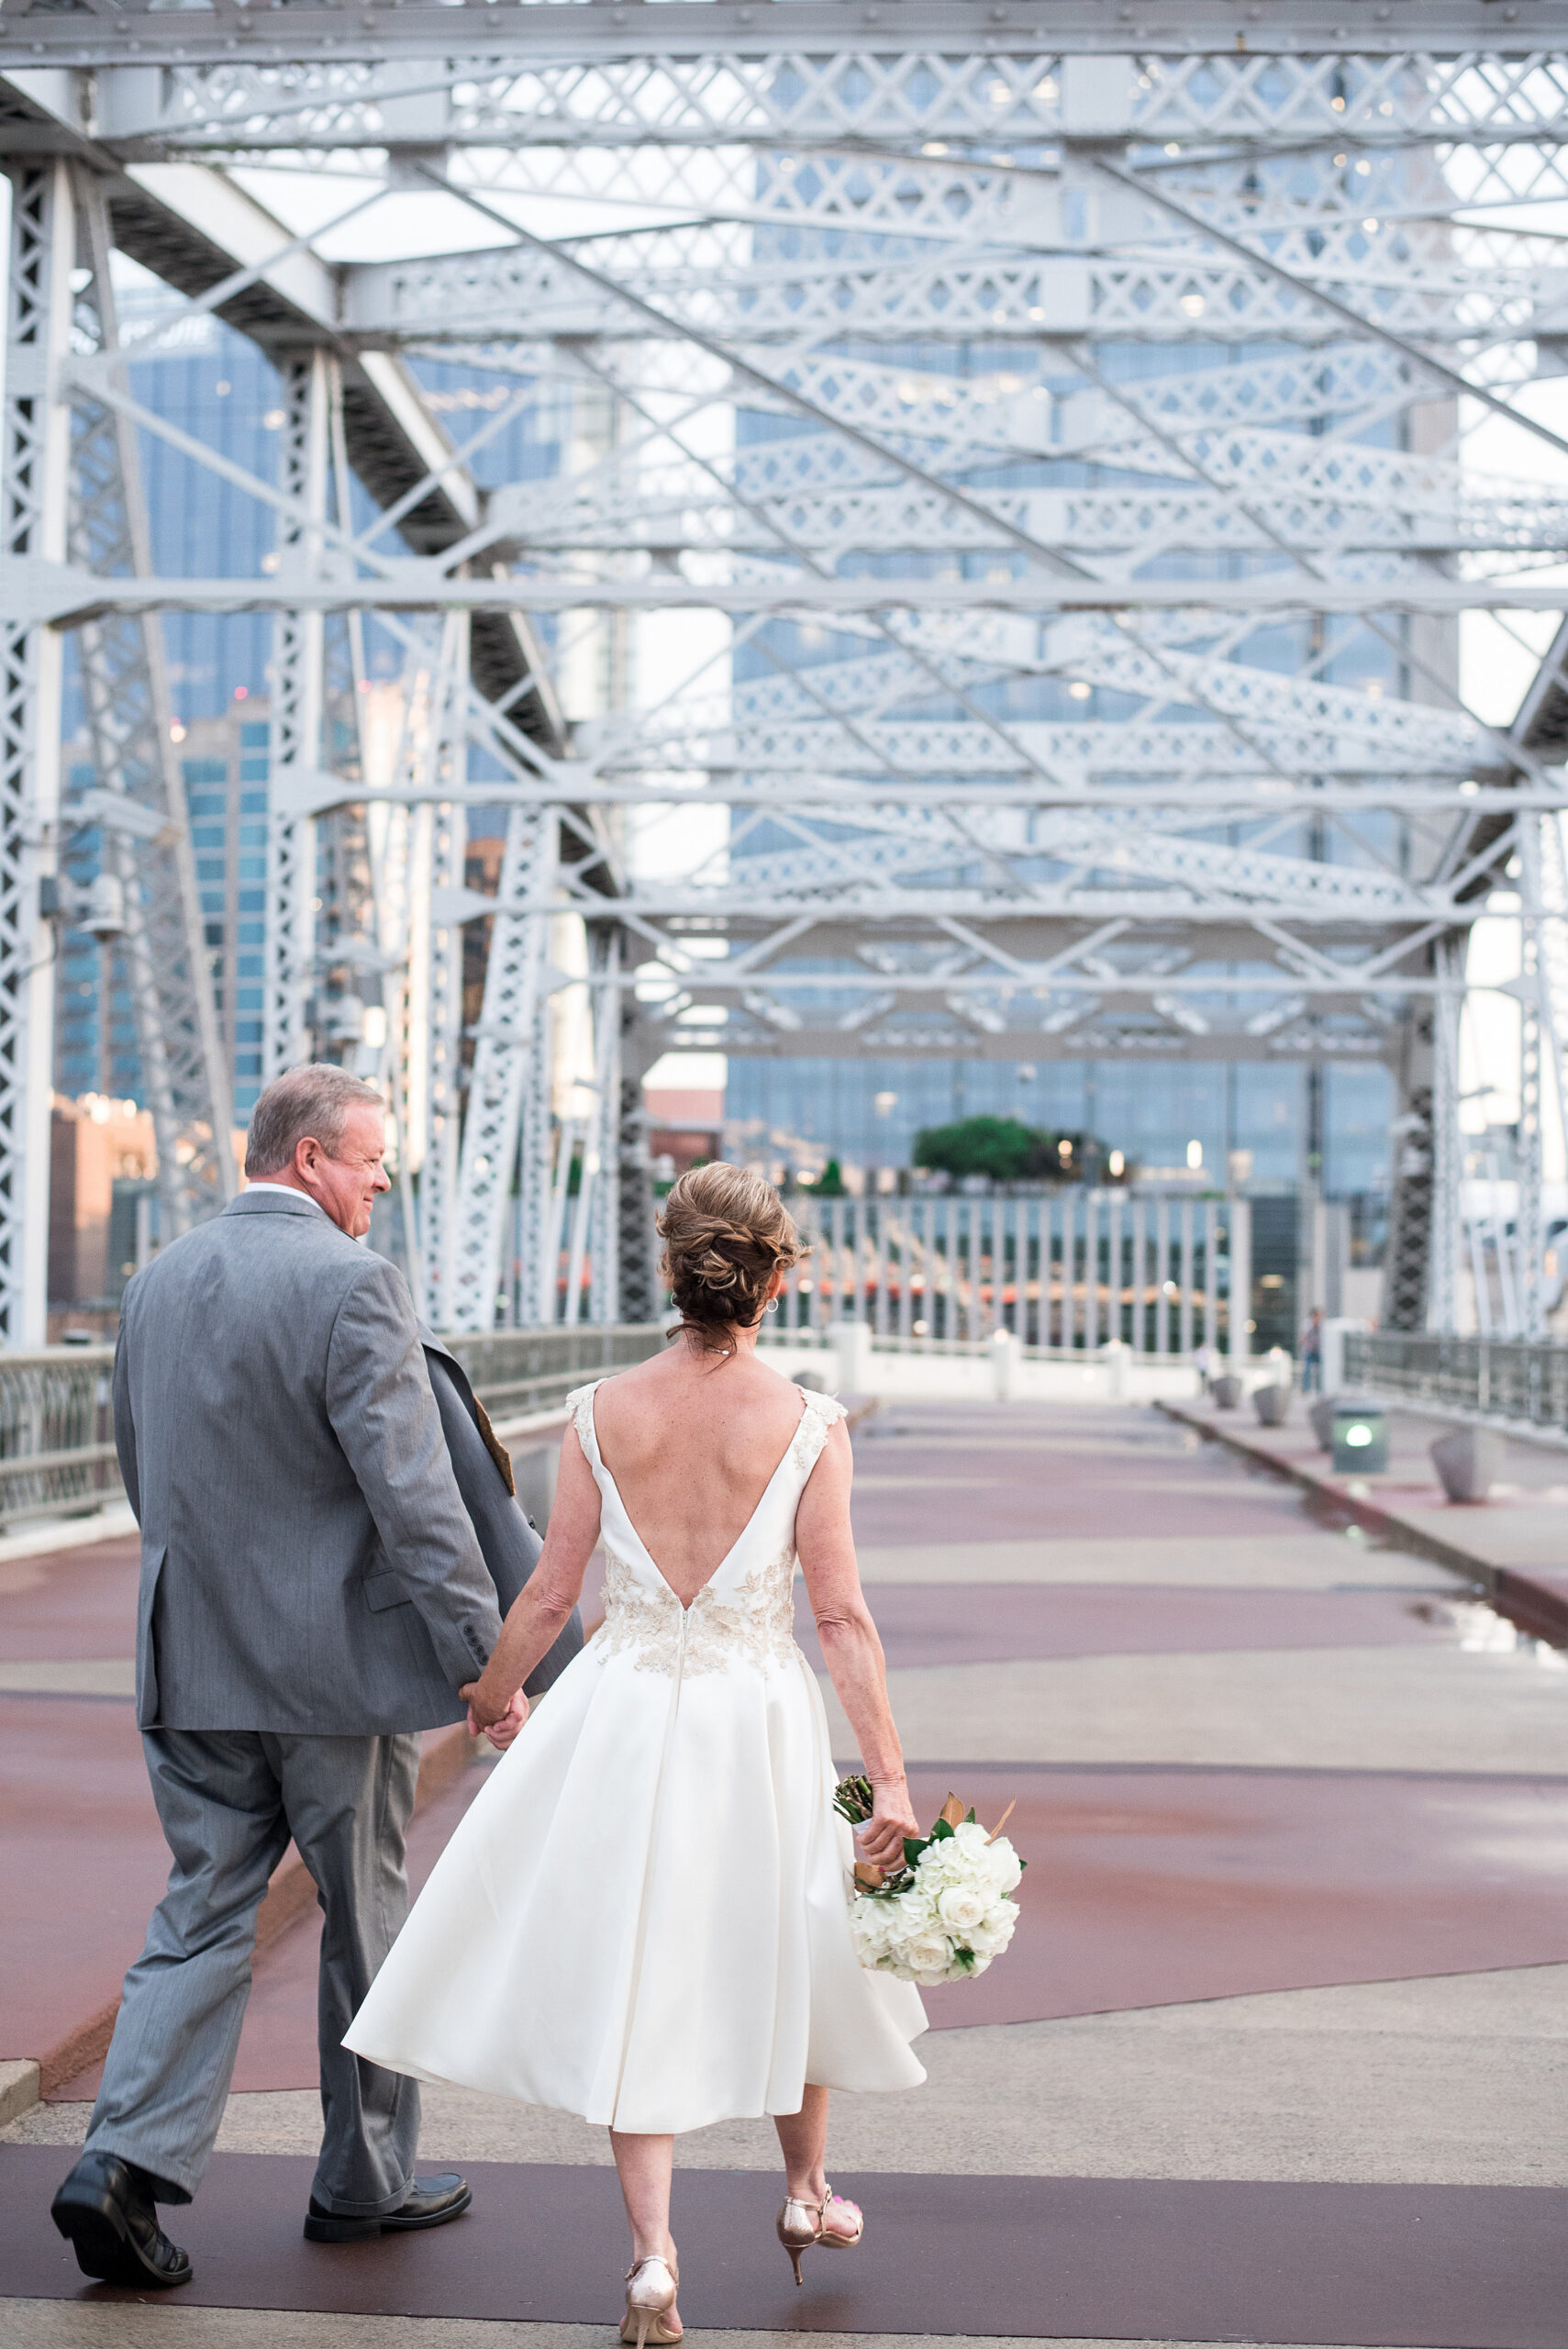 Walking hand in hand across the Pedestrian Bridge in Nashville, the bride and groom smile at each other. floor is red and beige striped in a triangle pattern. The grey trusses of the bridge are above them. The bride is wearing a tea length white wedding dress with a plunging back and no sleeves. There is lace detailing around the waist and at the shoulders. The bride has gold stilettos and is holding a large white bouquet of hydrangea and roses with magnolia leaves. The groom is wearing a gray suit with a white shirt and black shoes. 